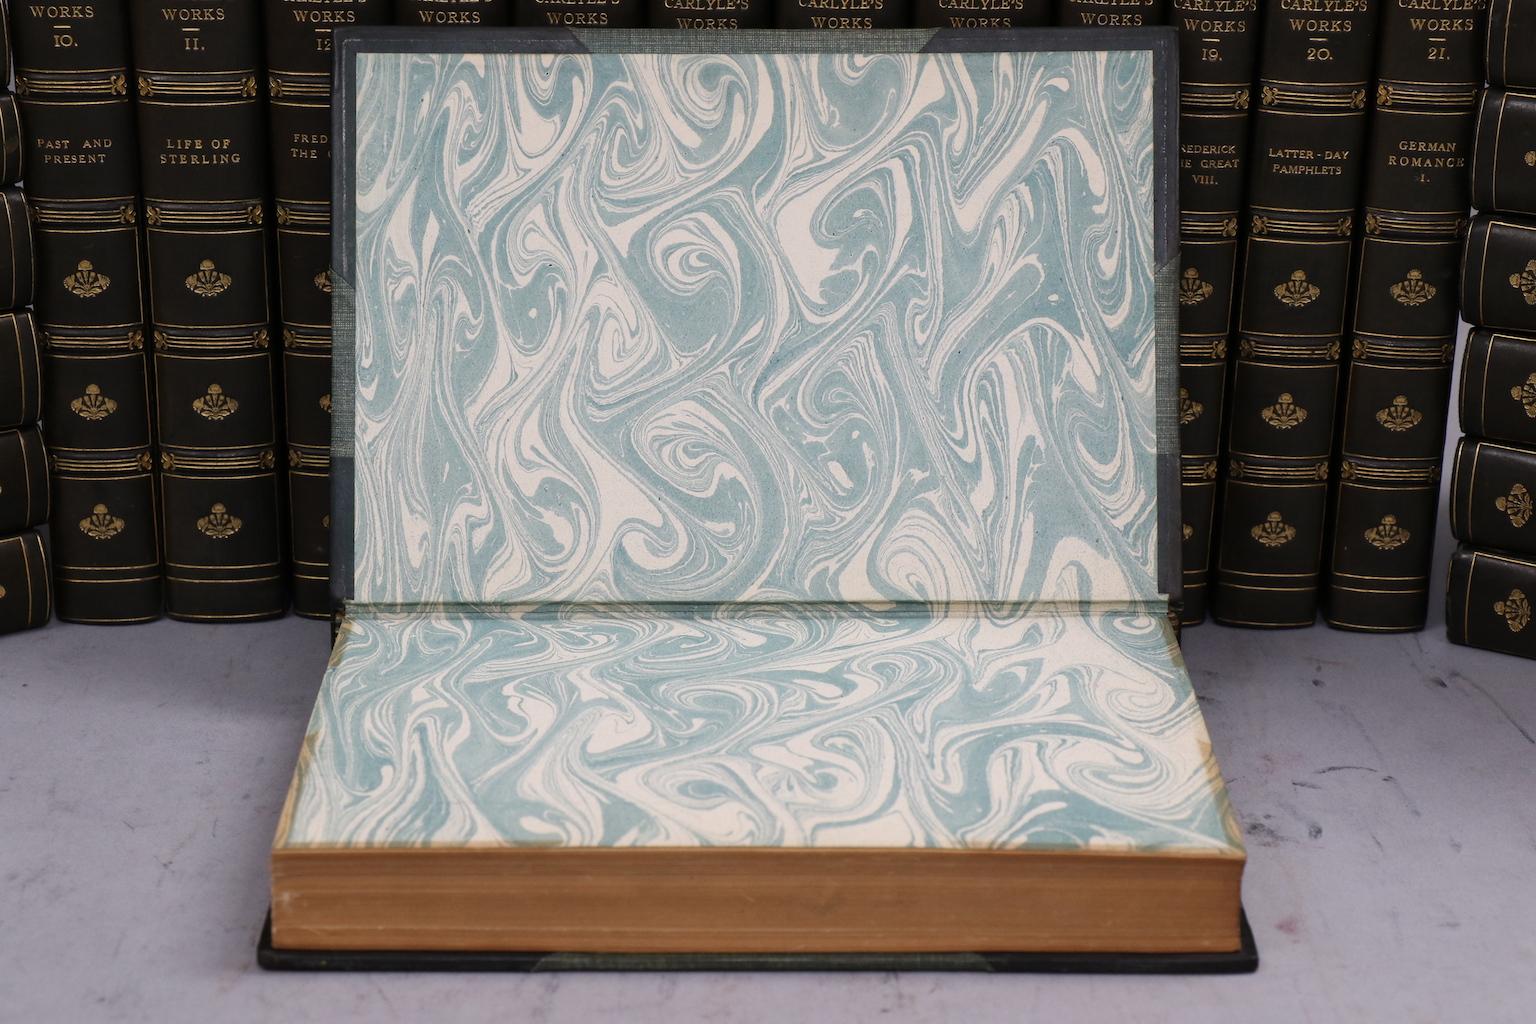 Leather Books, The Works of Thomas Carlyle